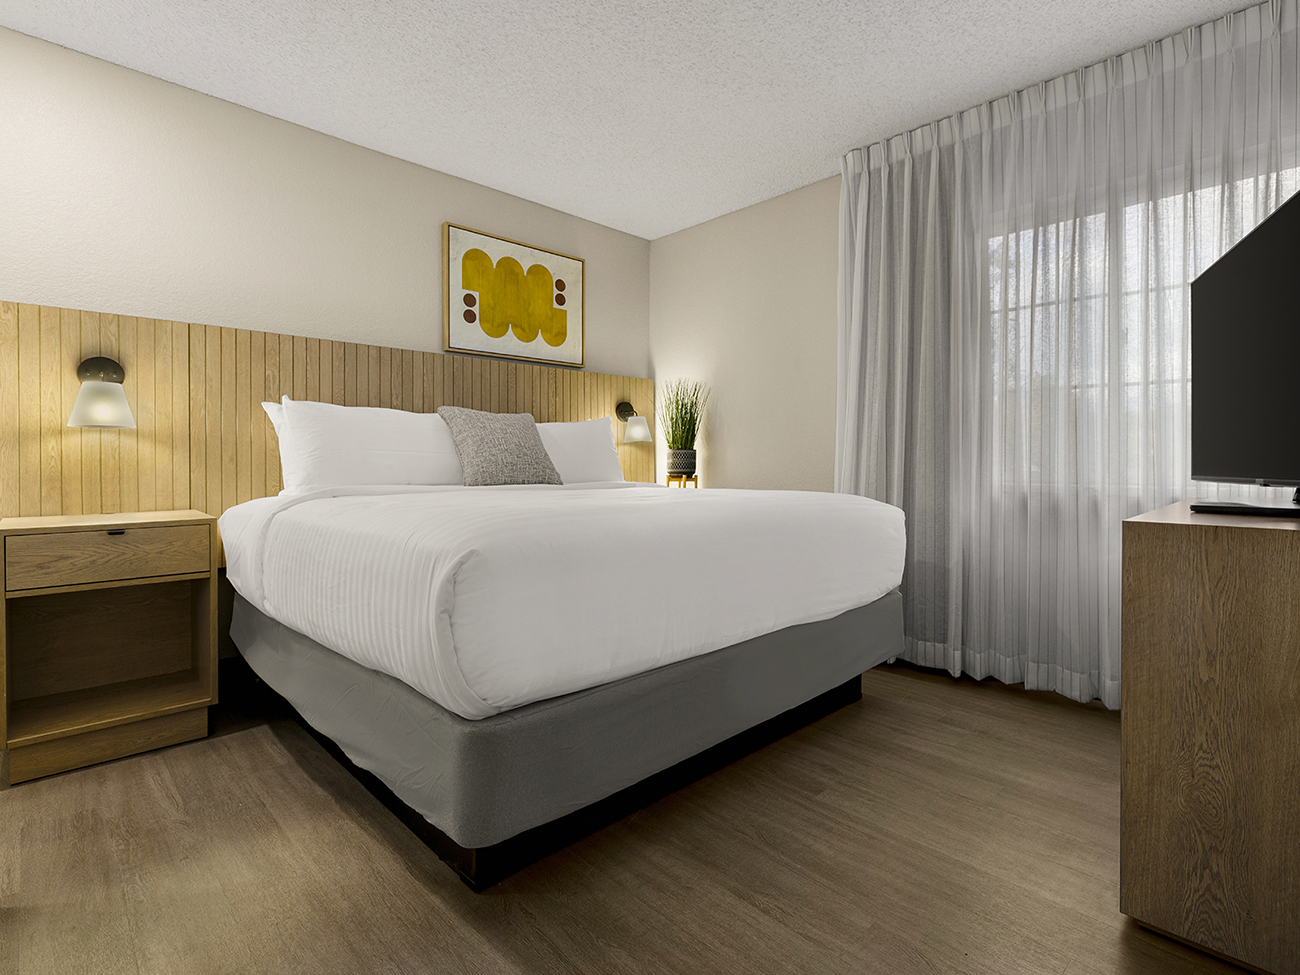 A guestroom with a queen bed at the Sonesta Simply Suites Irvine East Foothill hotel.